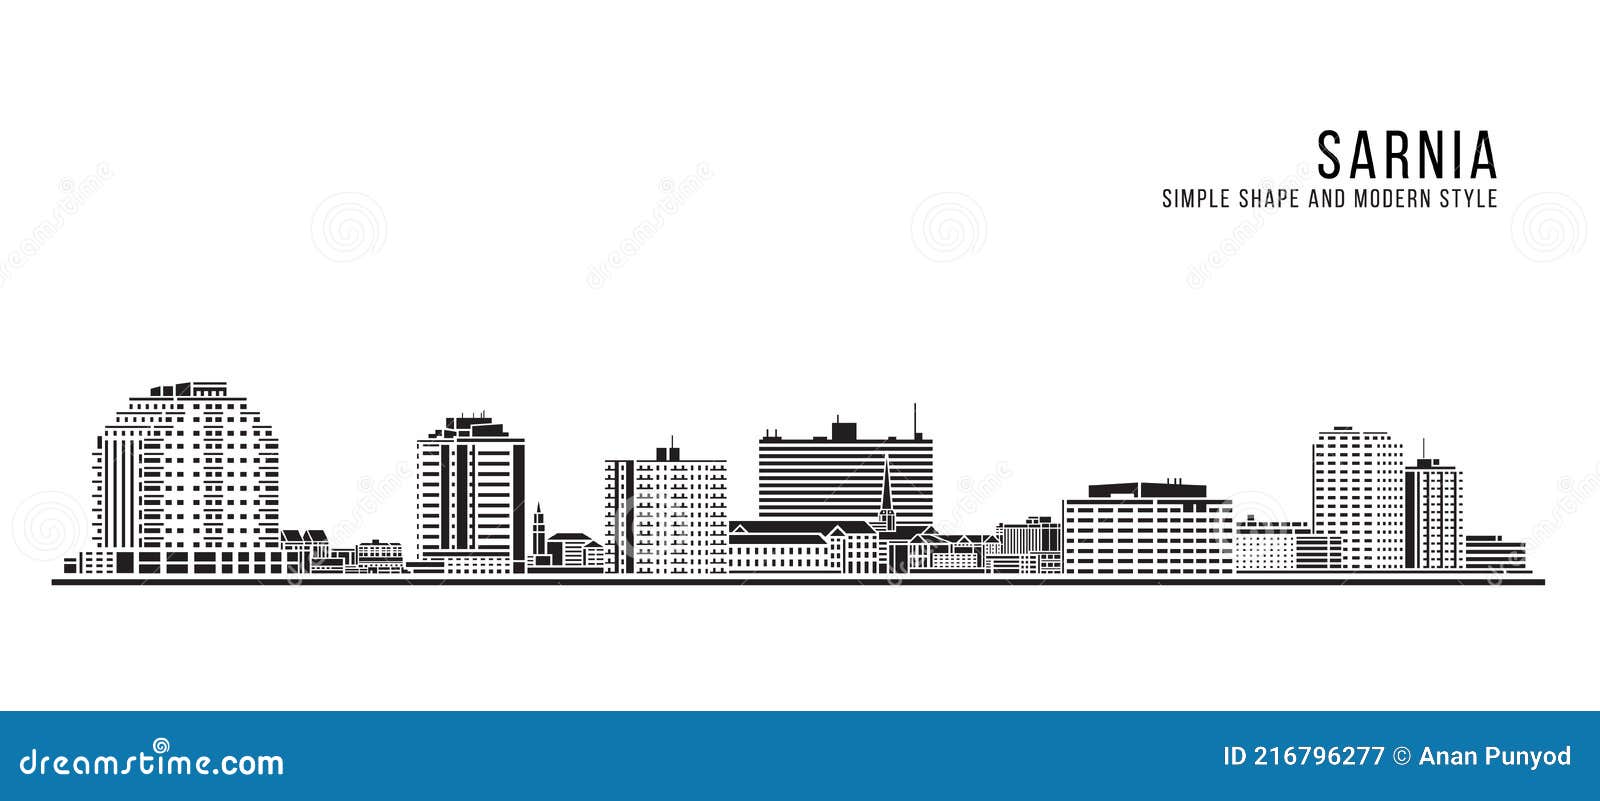 cityscape building abstract simple  and modern style art   - sarnia city